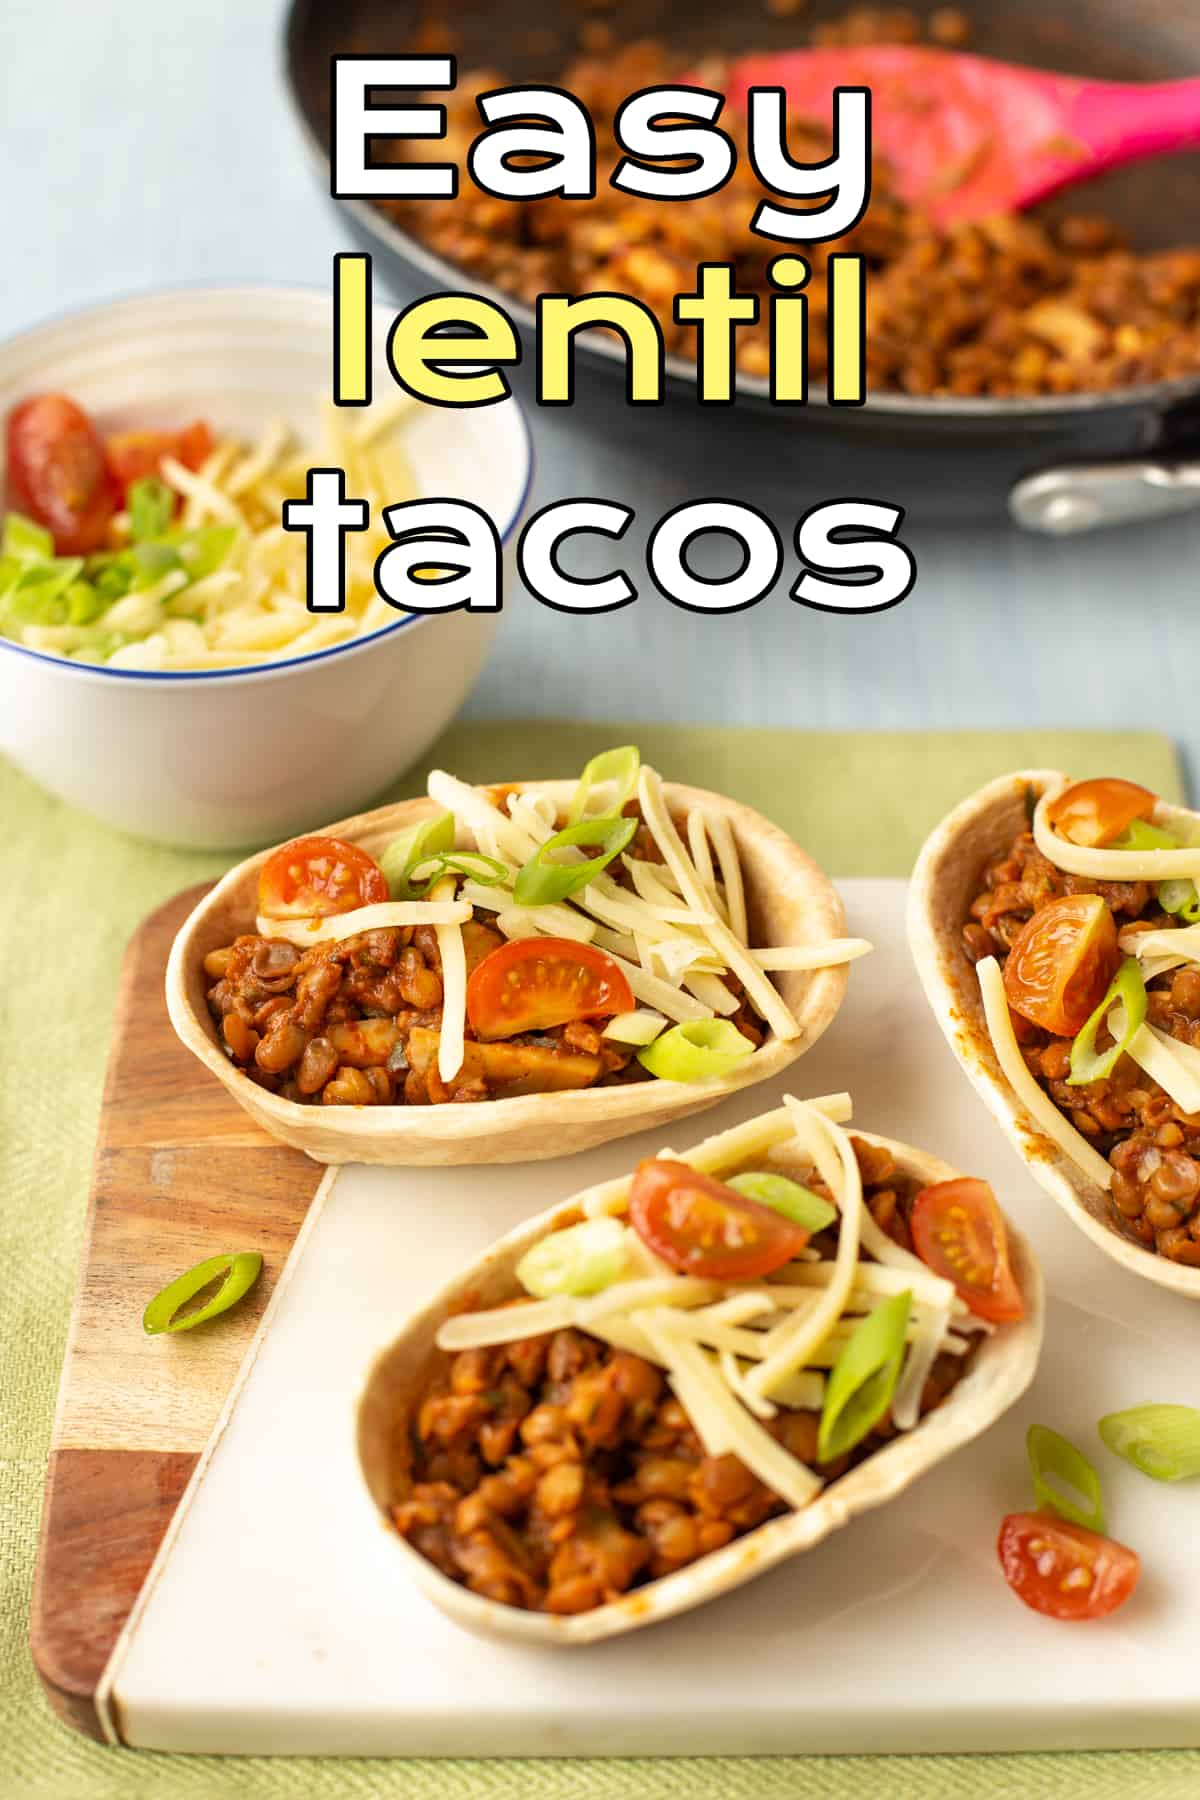 Vegetarian lentil tacos topped with cheese and cherry tomatoes.